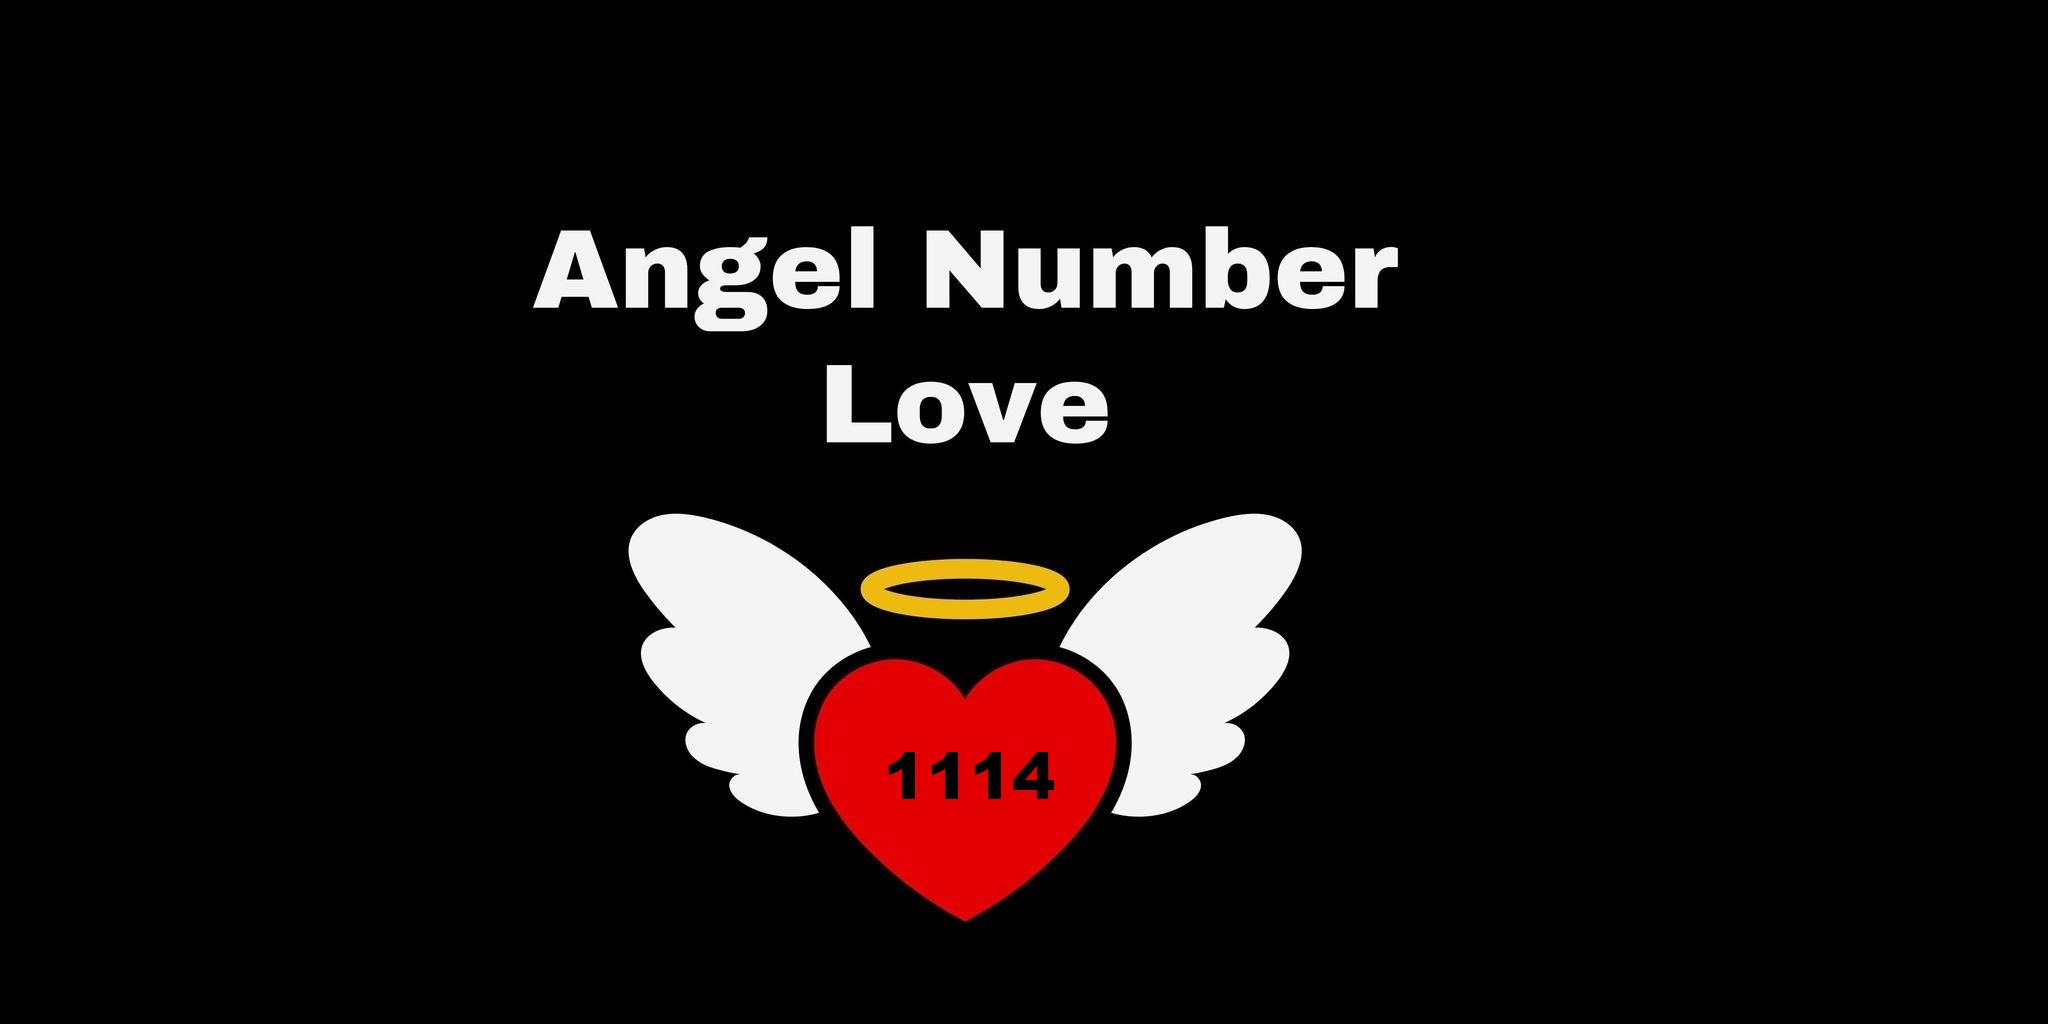 1114 Angel Number Meaning In Love